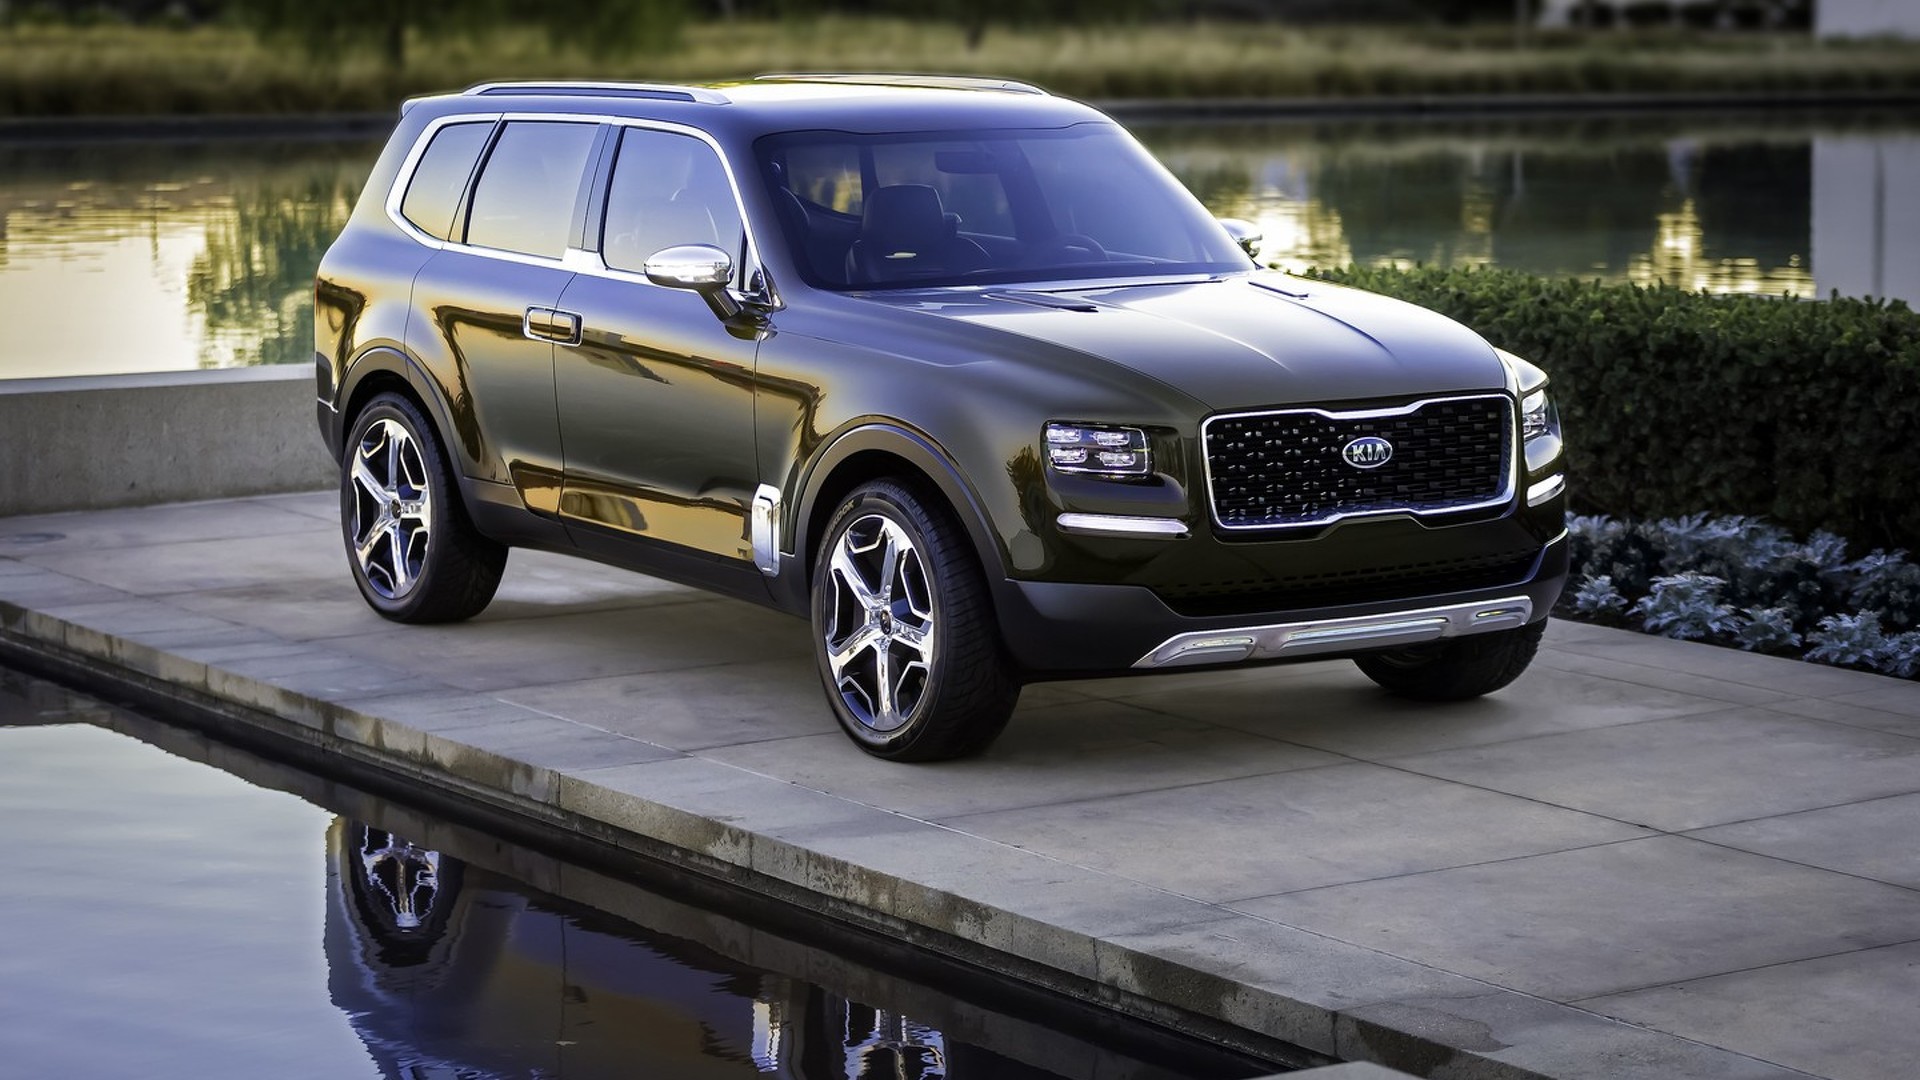 SUVs  Crossovers  Small MidSize  Larger Vehicles With Optional AWD   Kia